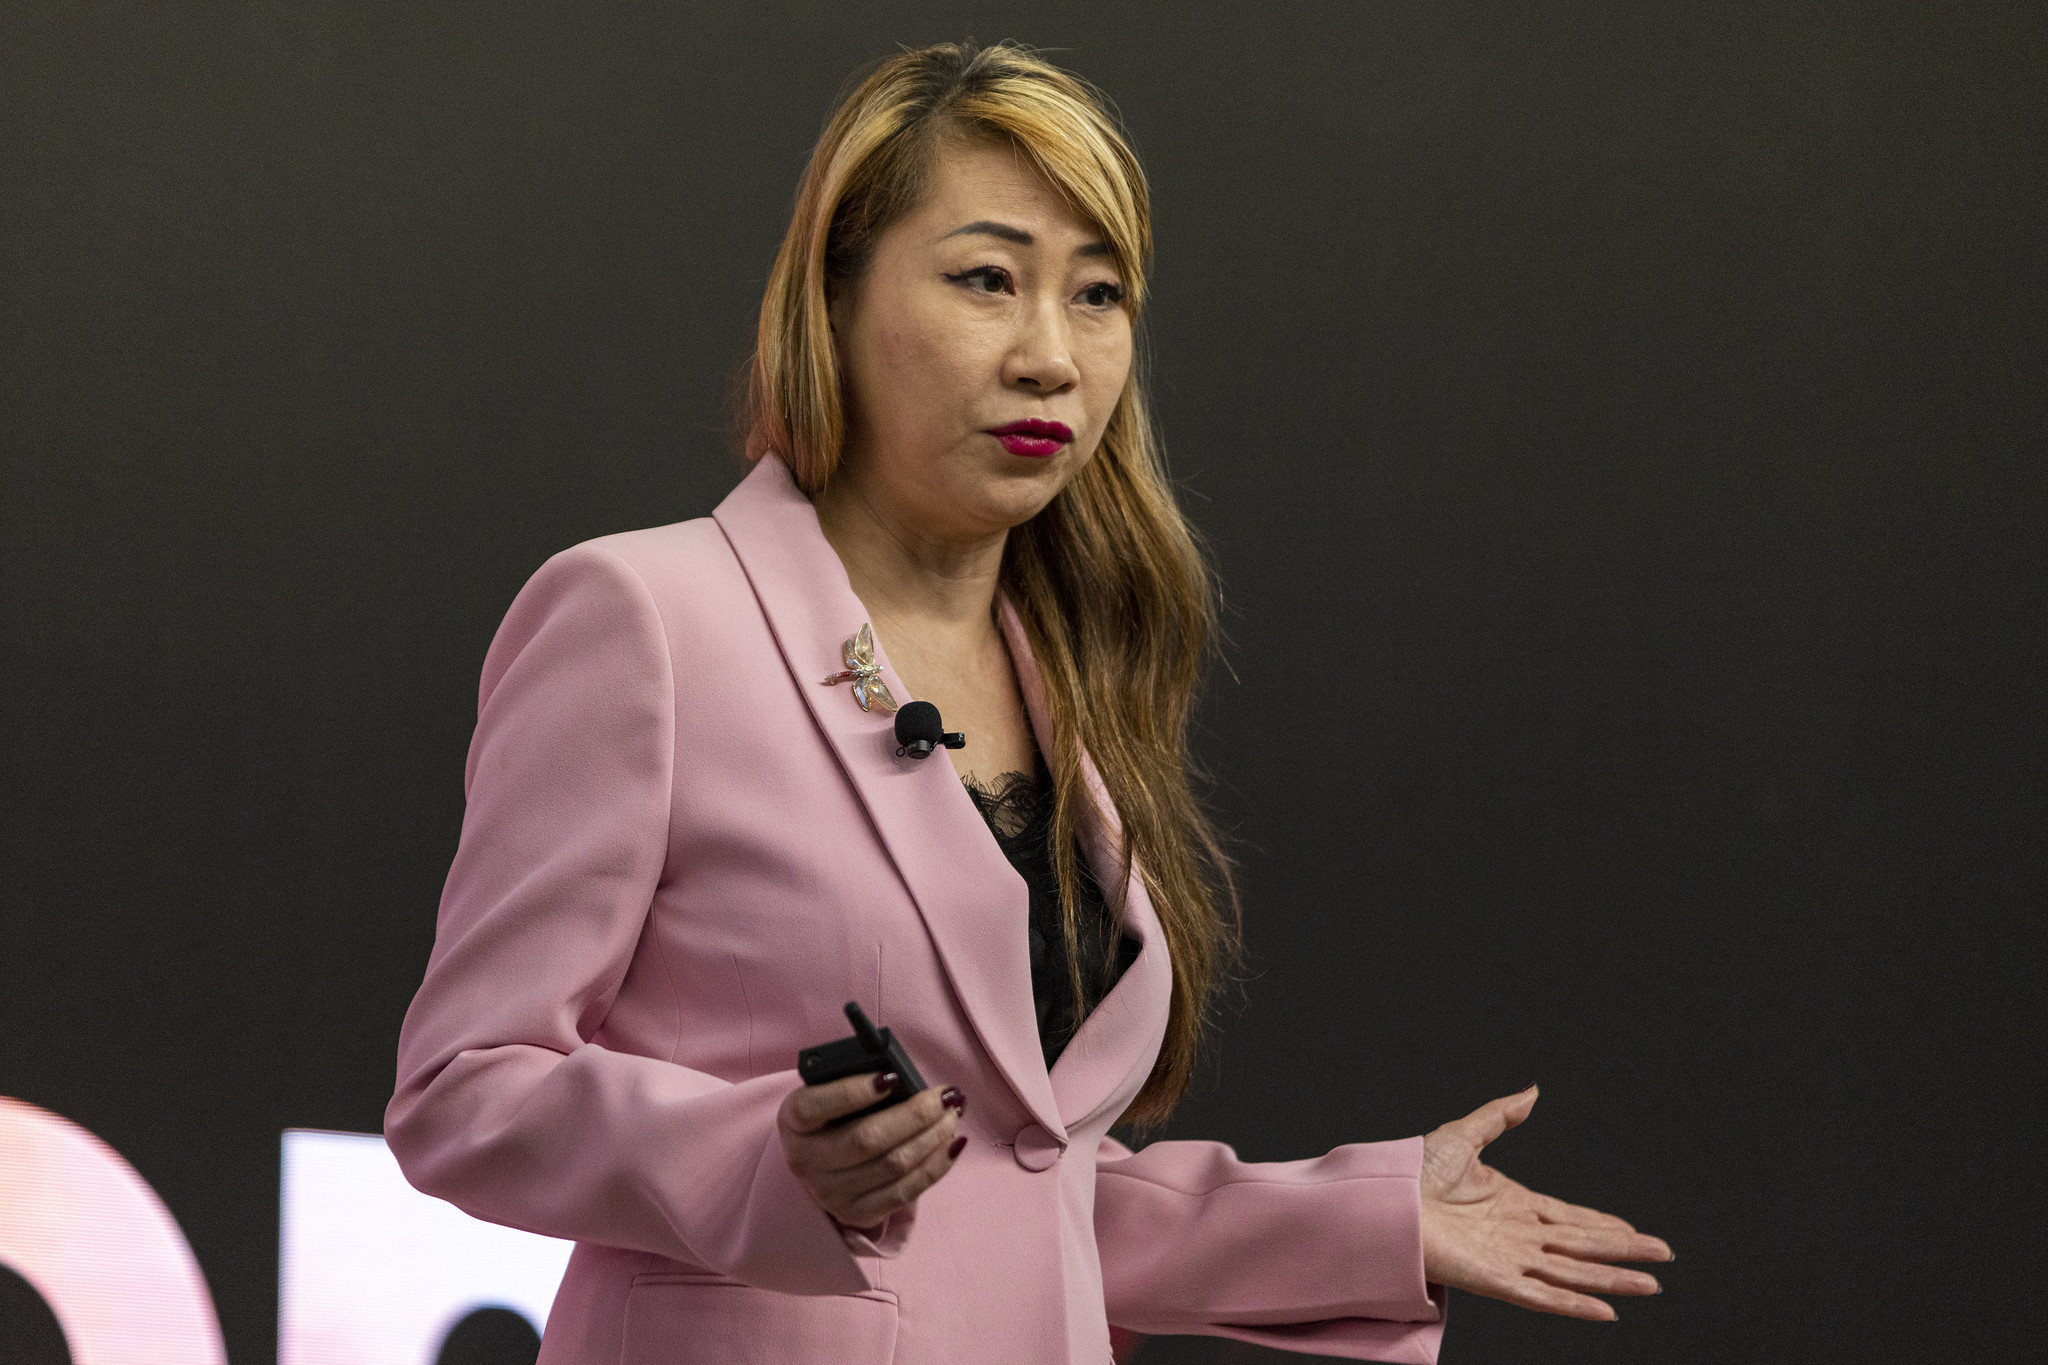 Prof. Pascale FUNG, Chair Professor of the Department of Electronic and Computer Engineering and Director of Center for Artificial Intelligence Research